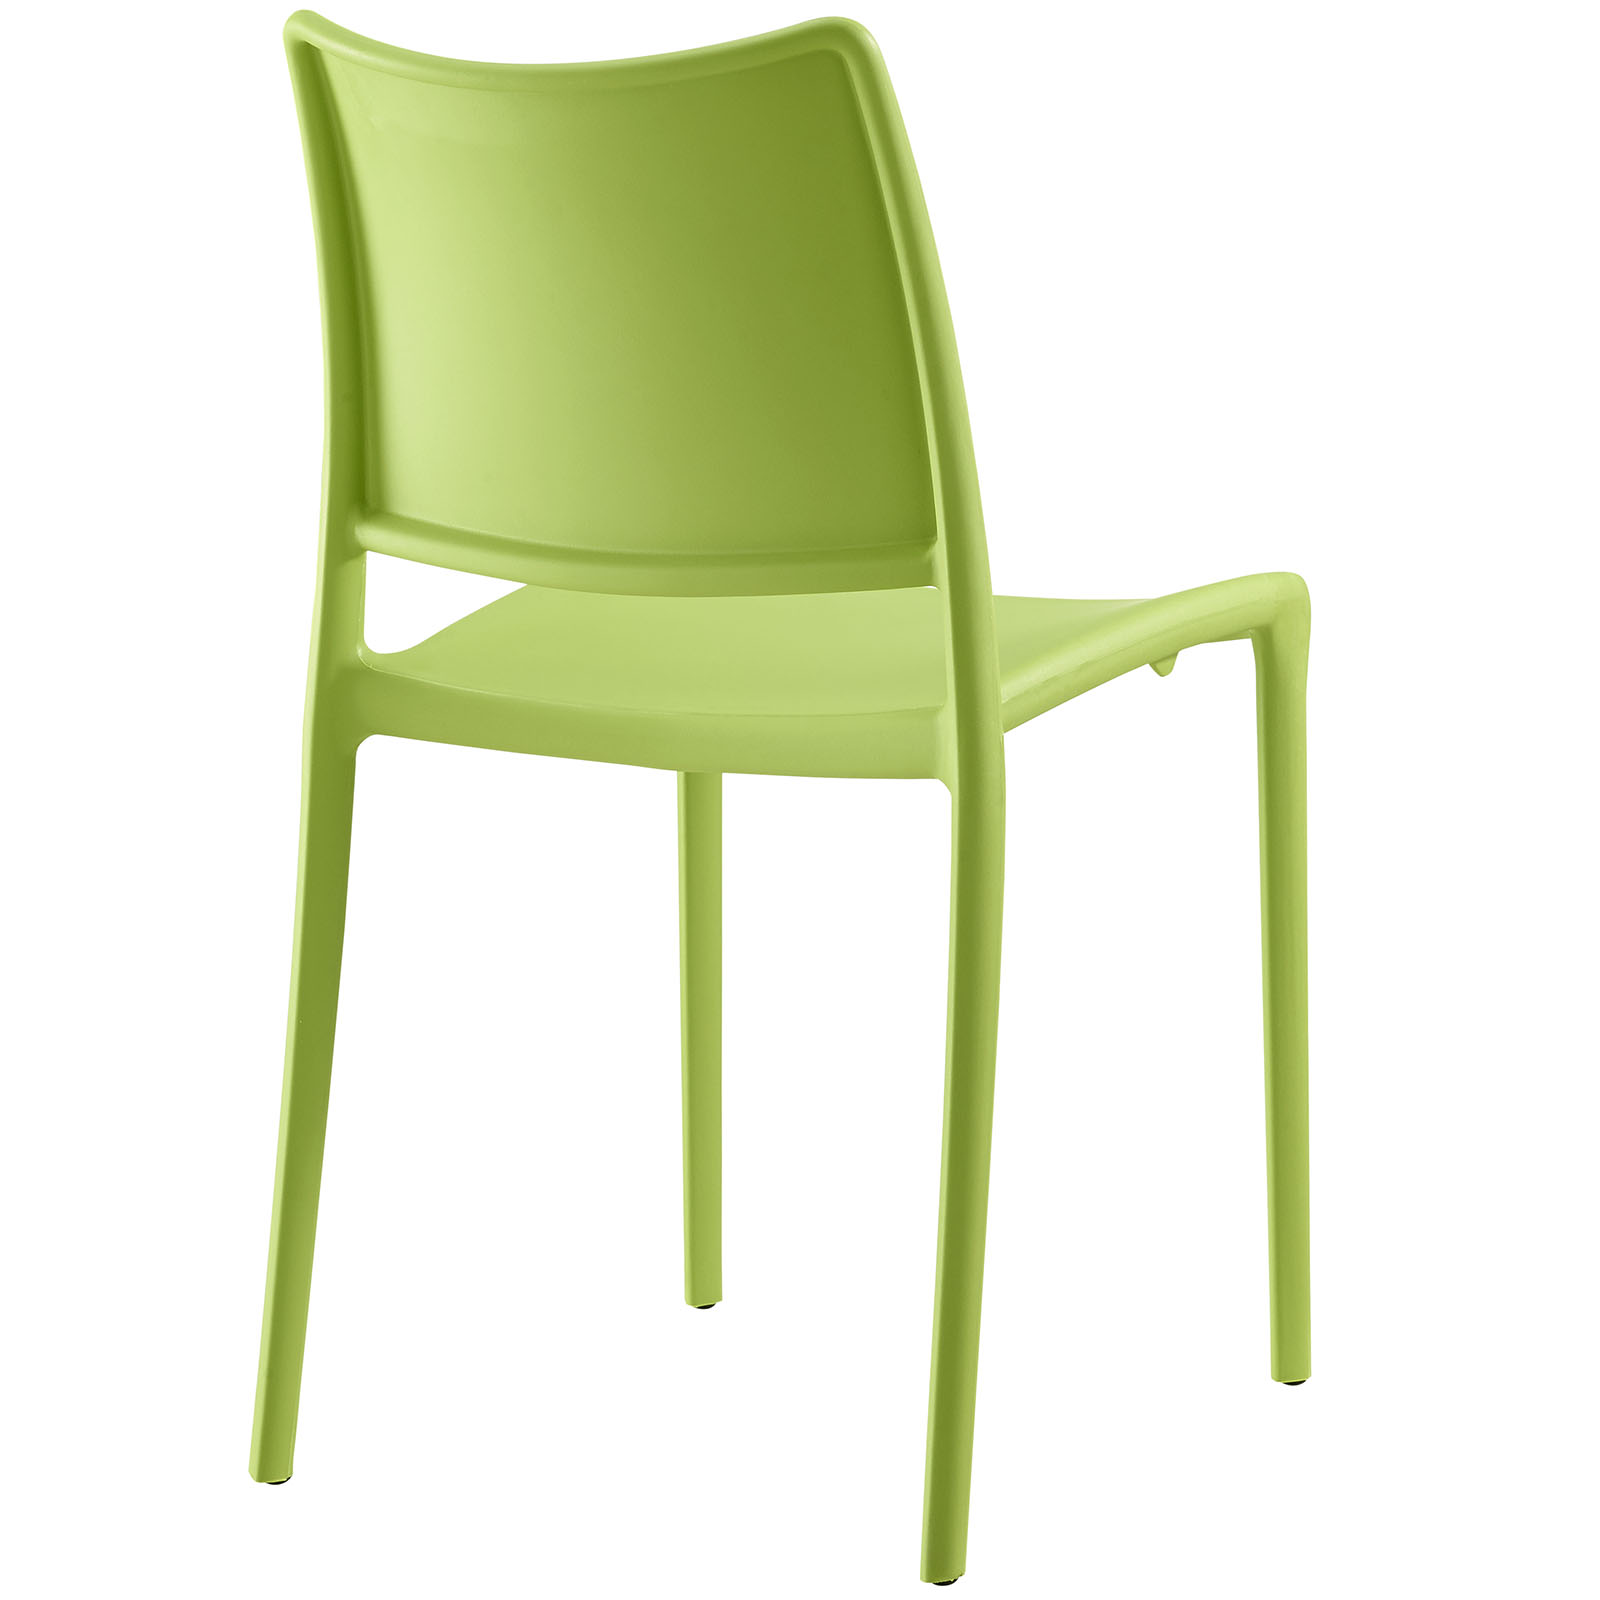 Modern Contemporary Urban Design Outdoor Kitchen Room Dining Chair ( Set of 4), Green, Plastic - image 5 of 5